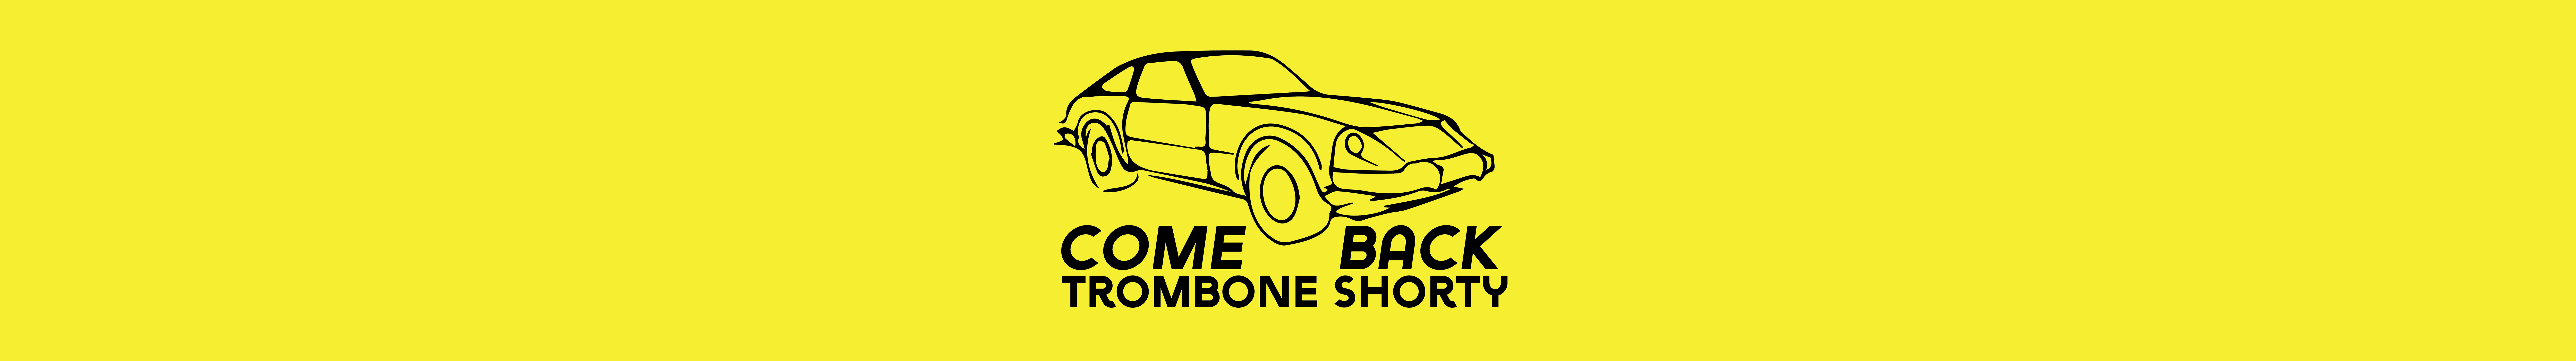 Trombone Shorty, Come Back, Pick of the Week